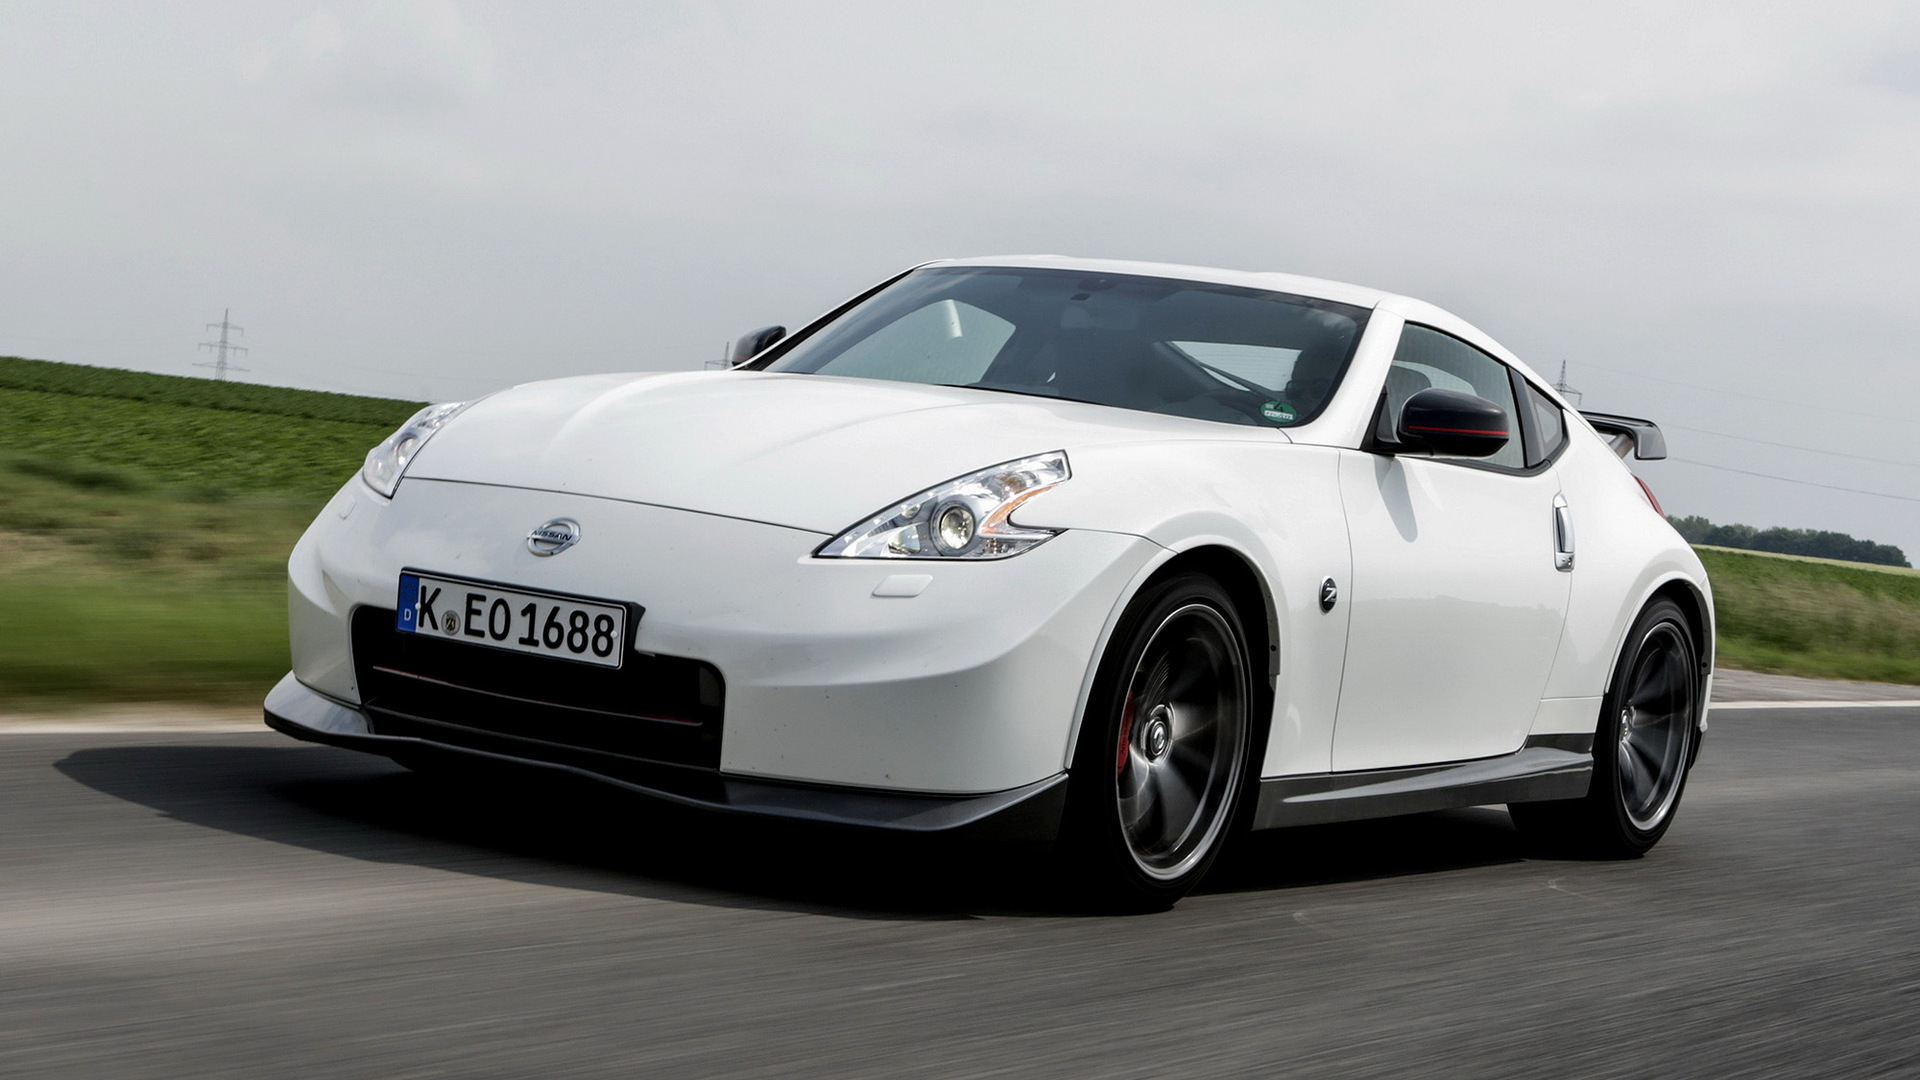 Nissan 370Z Nismo 2013 Wallpapers and HD Images   Car Pixel